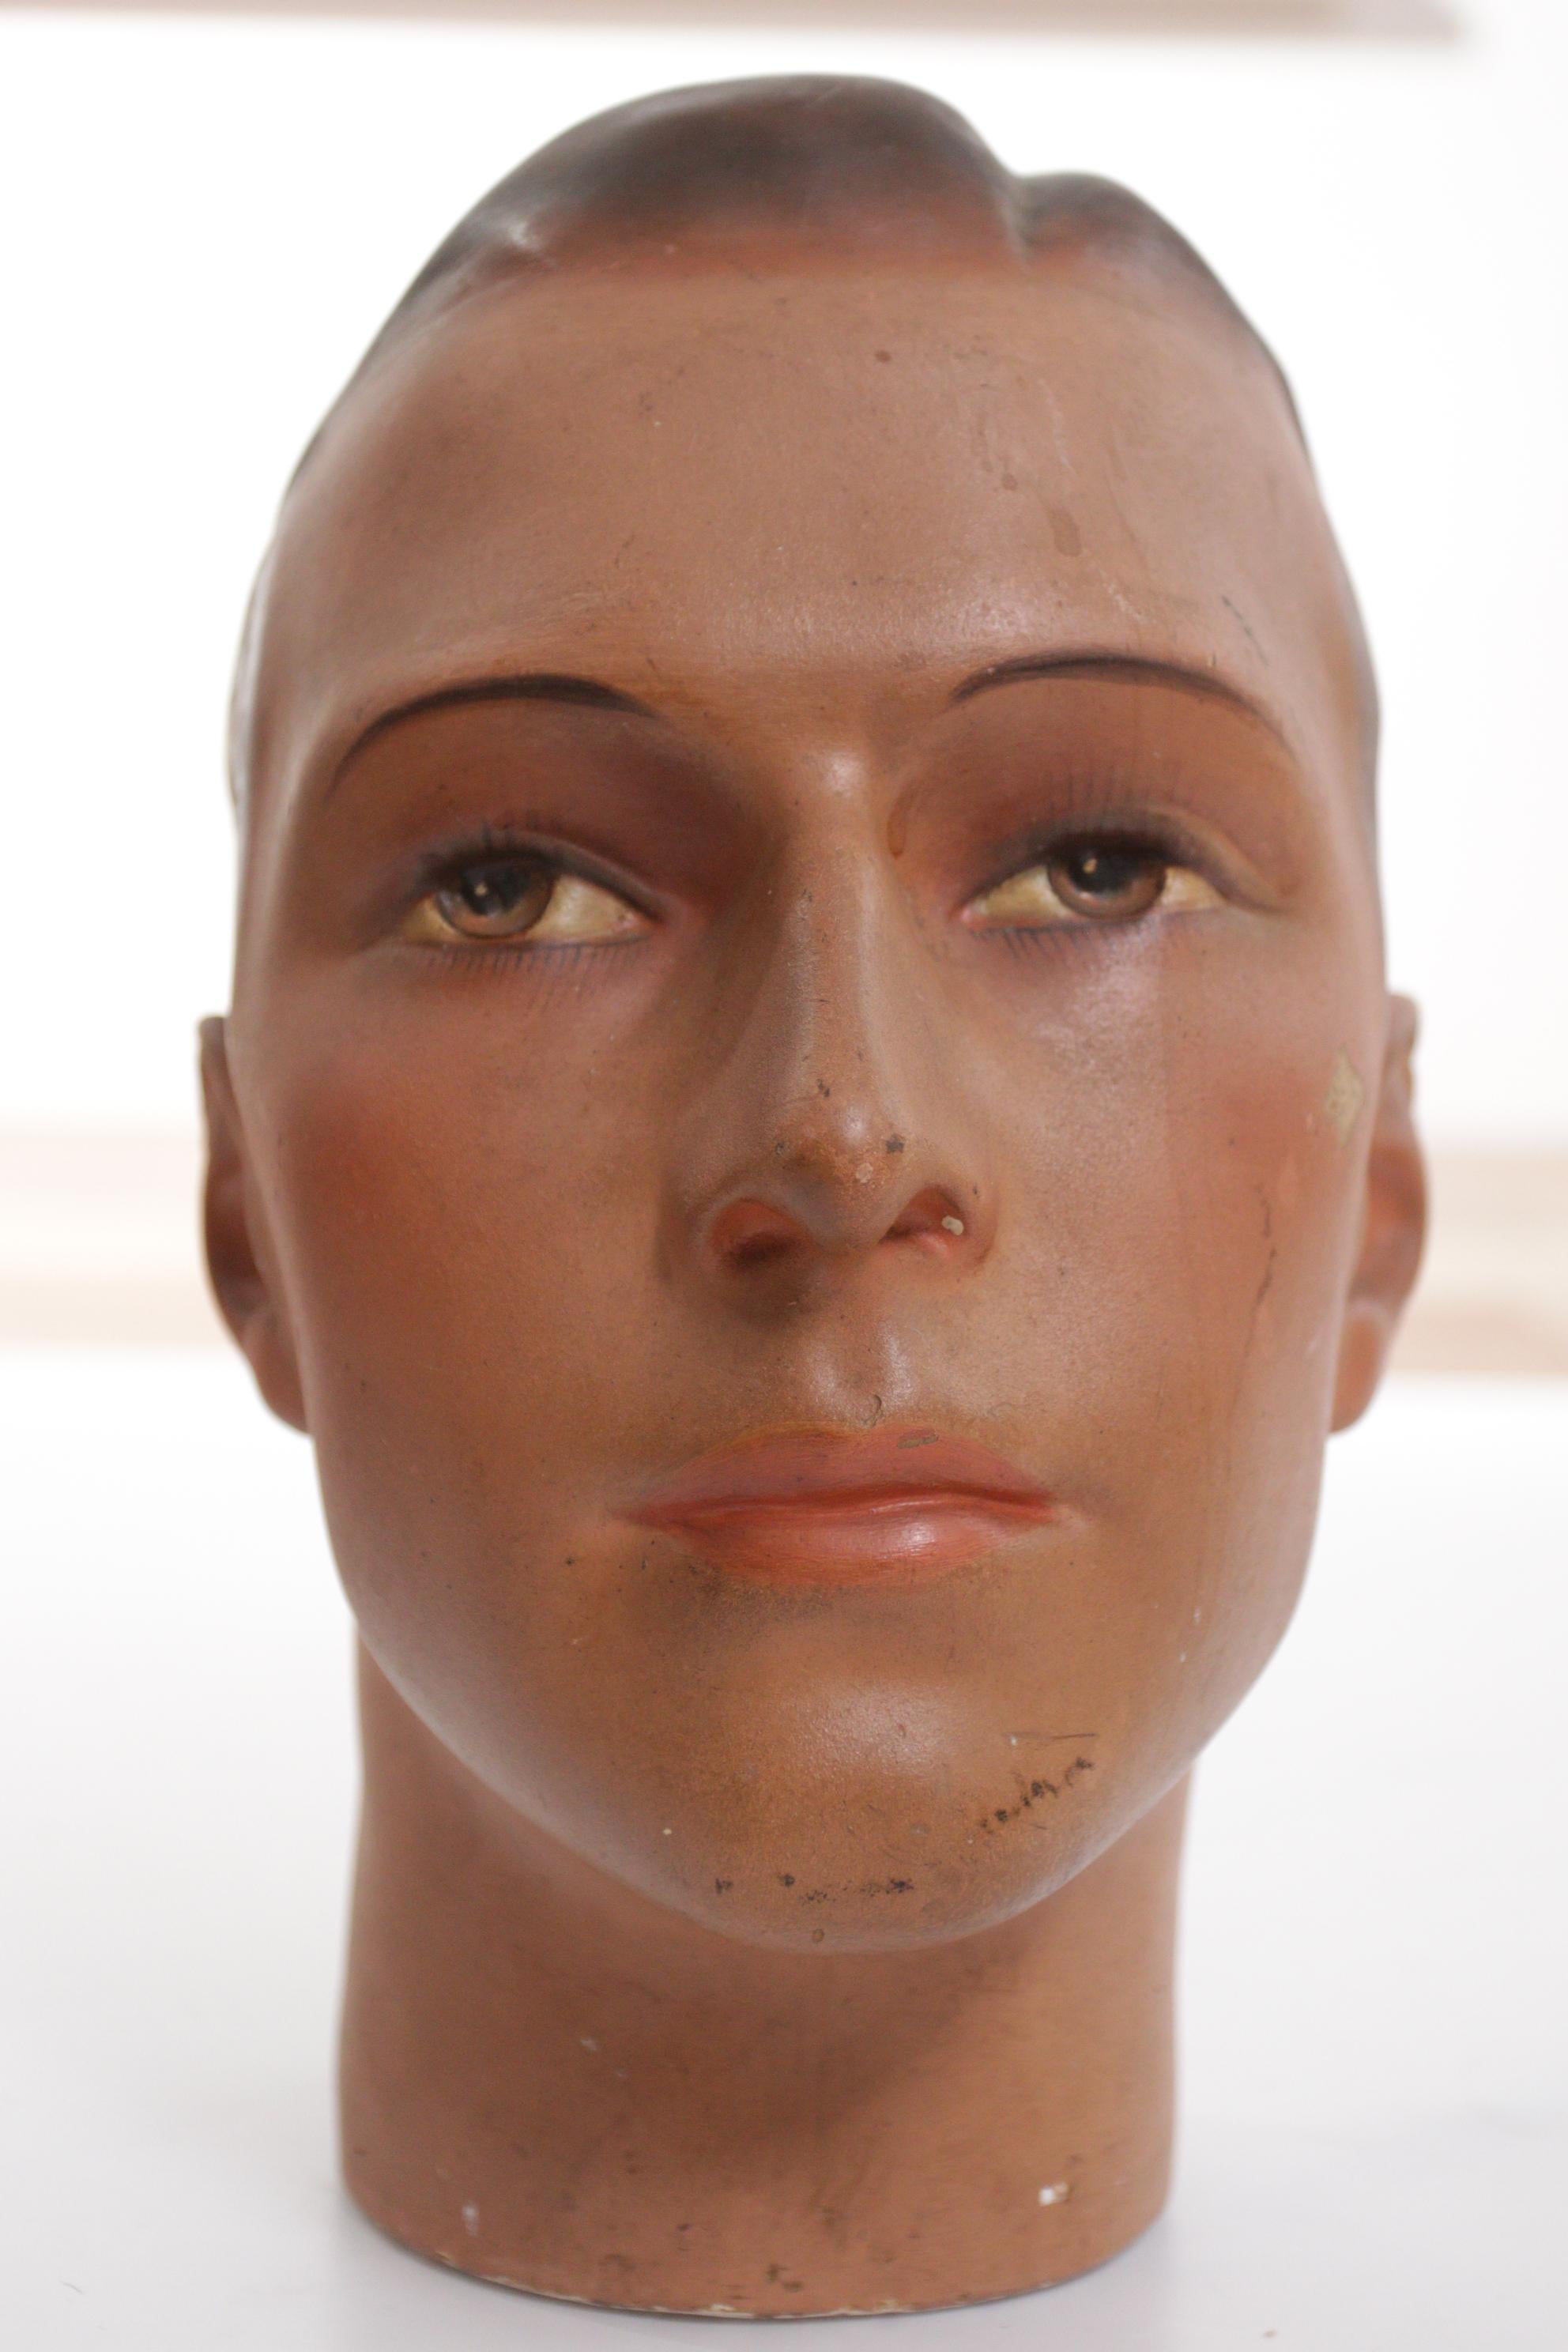 French Antique Art Deco 1920s Collectable Original Mannequin Display Head Nr2 For Sale